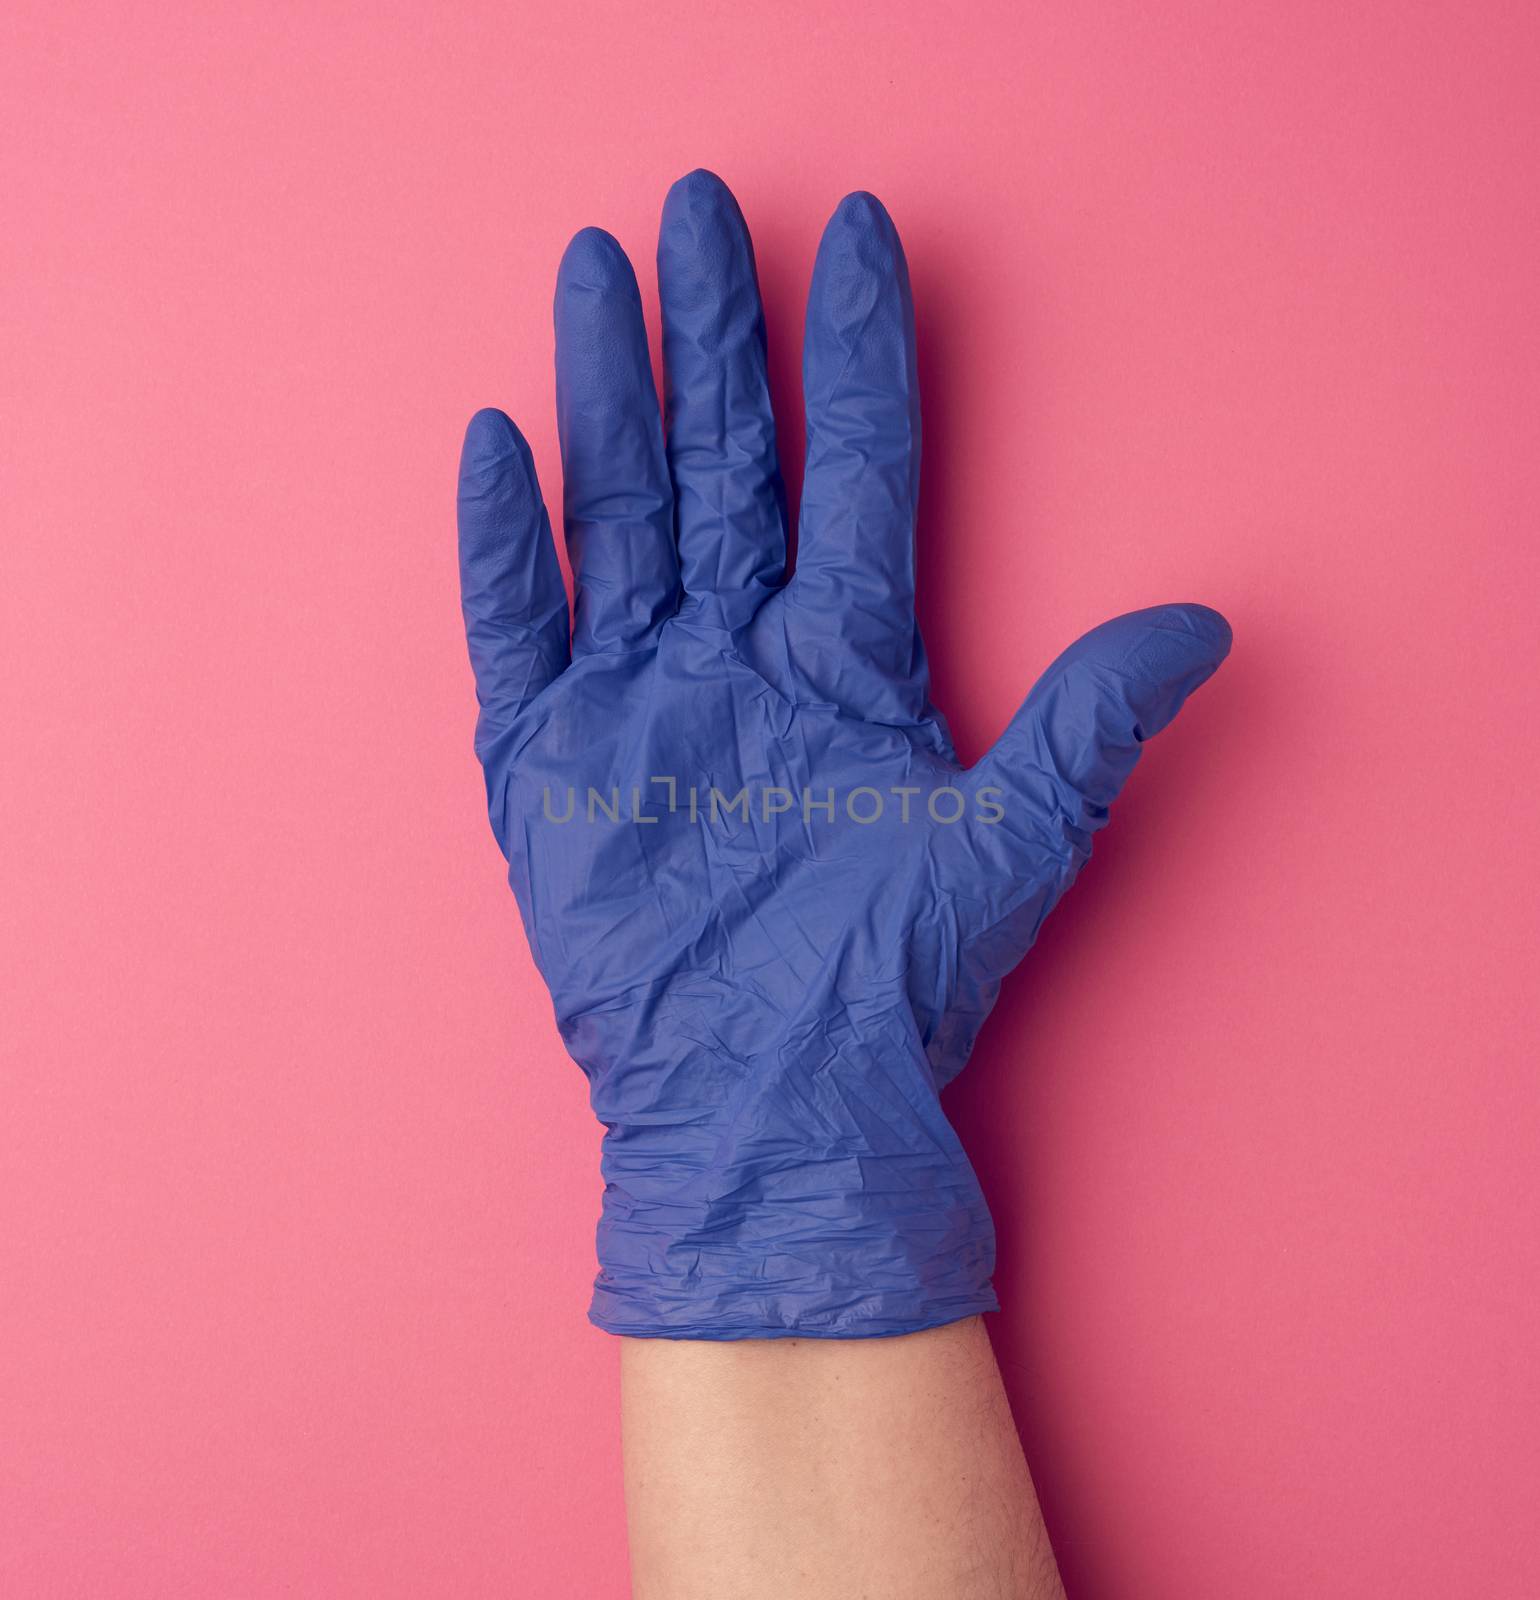 blue medical glove is worn on the arm, part of the body on a pink background, close up